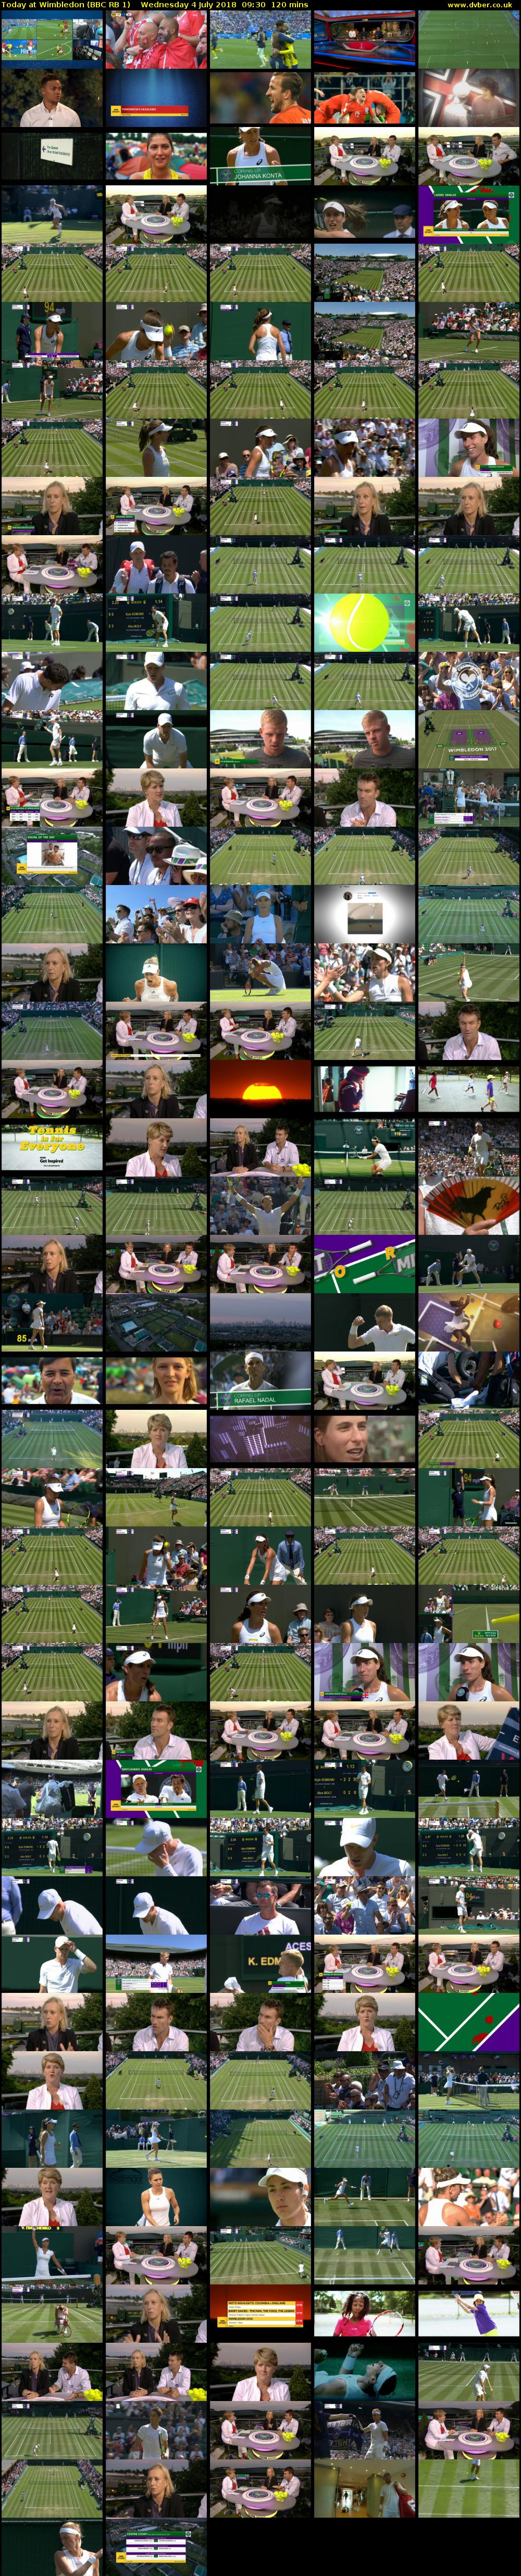 Today at Wimbledon (BBC RB 1) Wednesday 4 July 2018 09:30 - 11:30